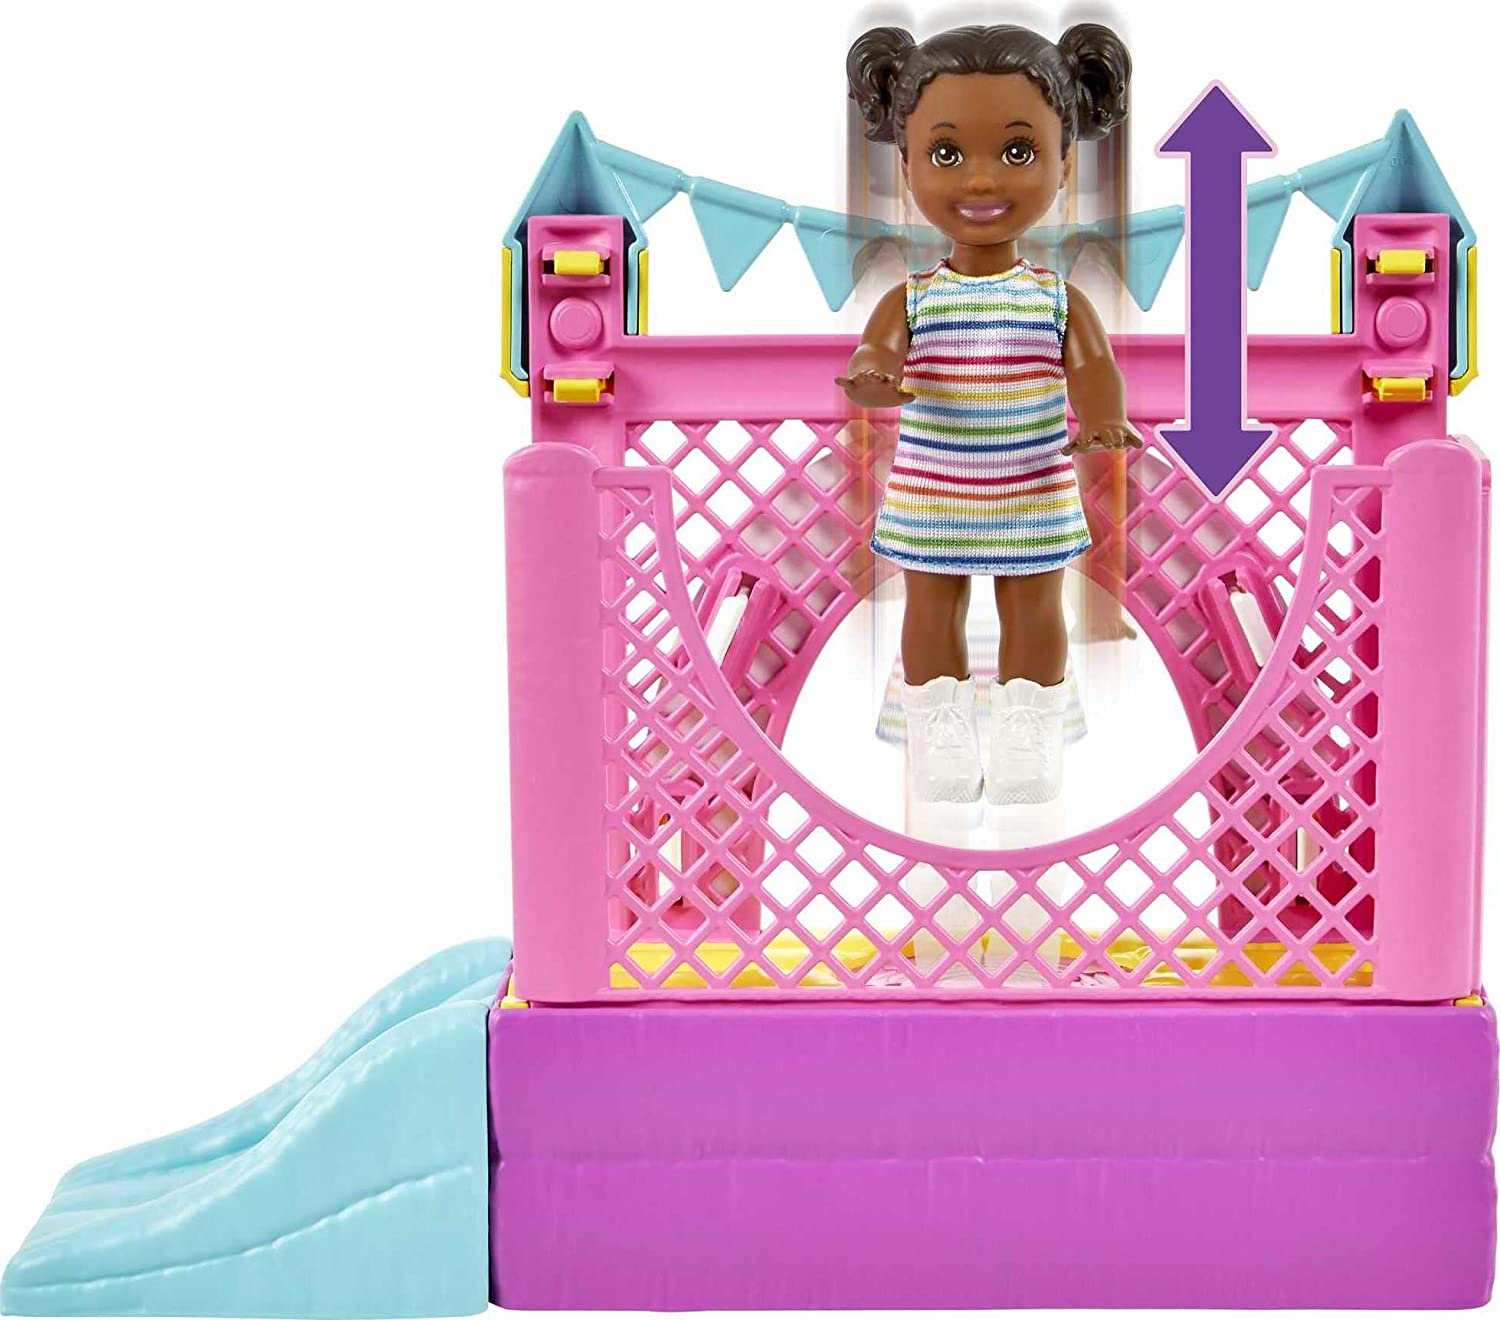 Barbie Skipper Babysitters Inc Bounce House Playset with Skipper & Toddler Dolls